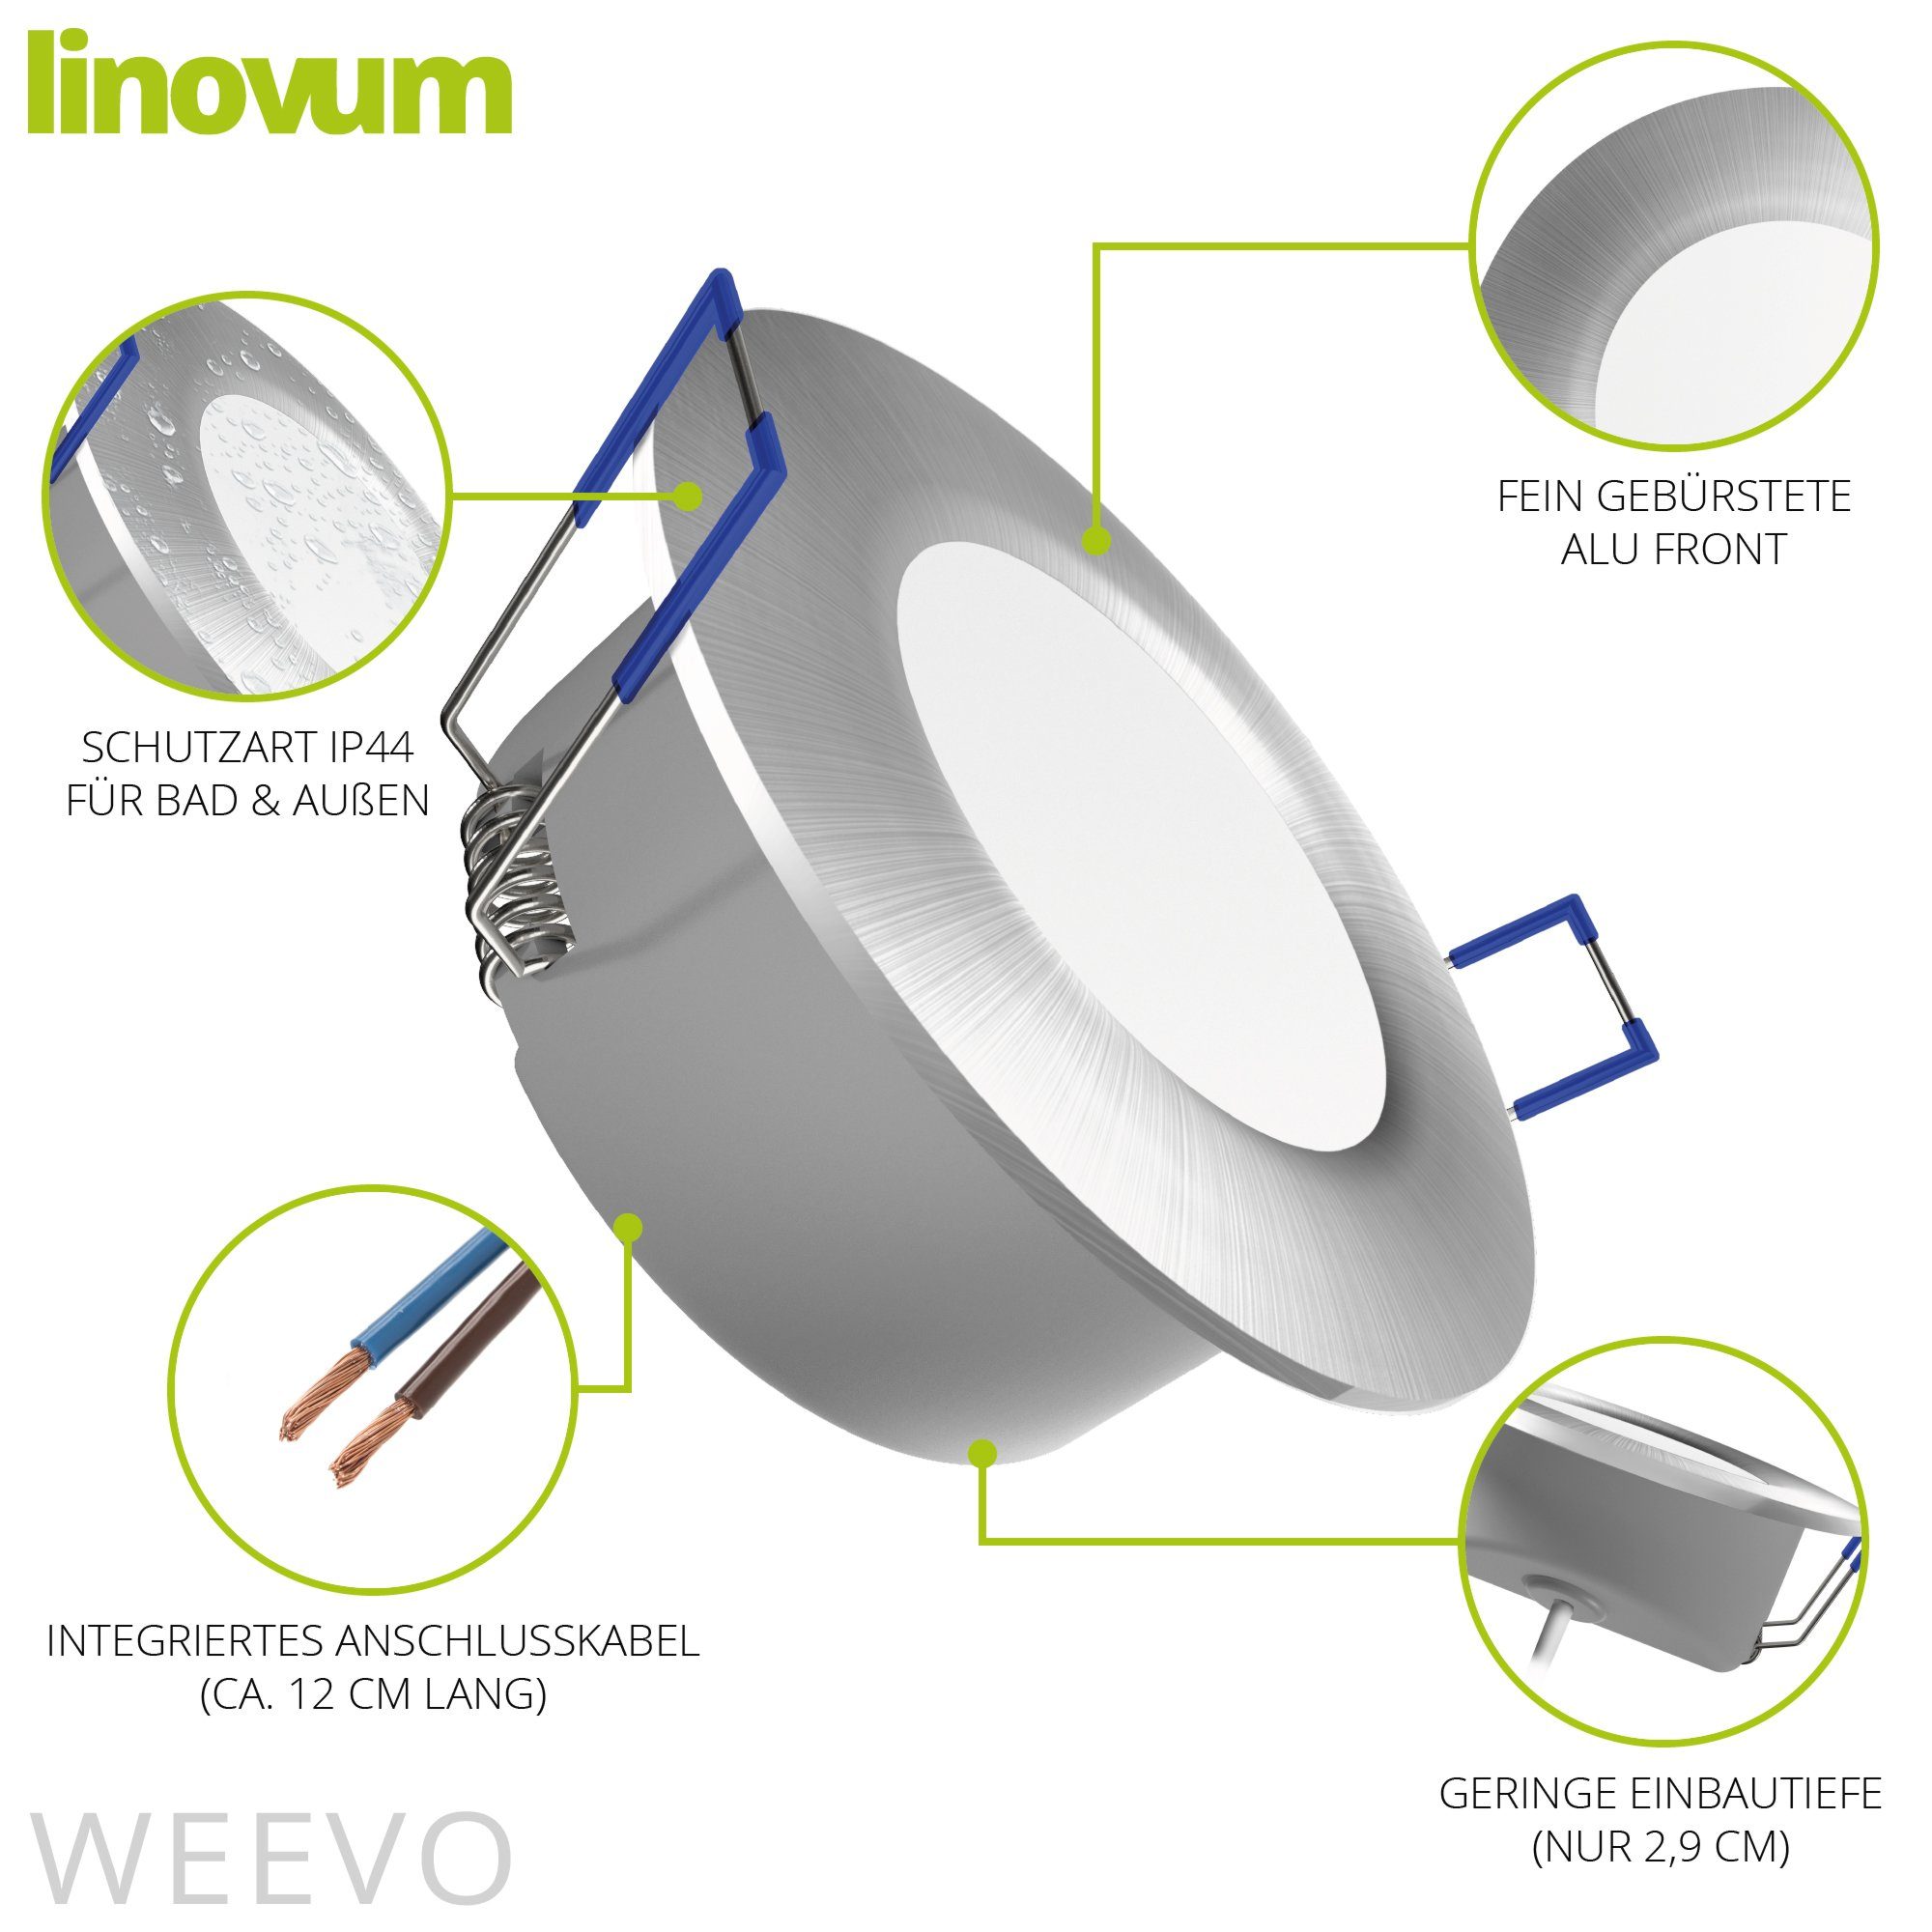 flach - Bad LED Downlight, LED-Leuchtmittel warmweiss LED Set fest WEEVO verbaut, verbaut 10er LED-Leuchtmittel 5W fest Einbaustrahler linovum Einbauspots